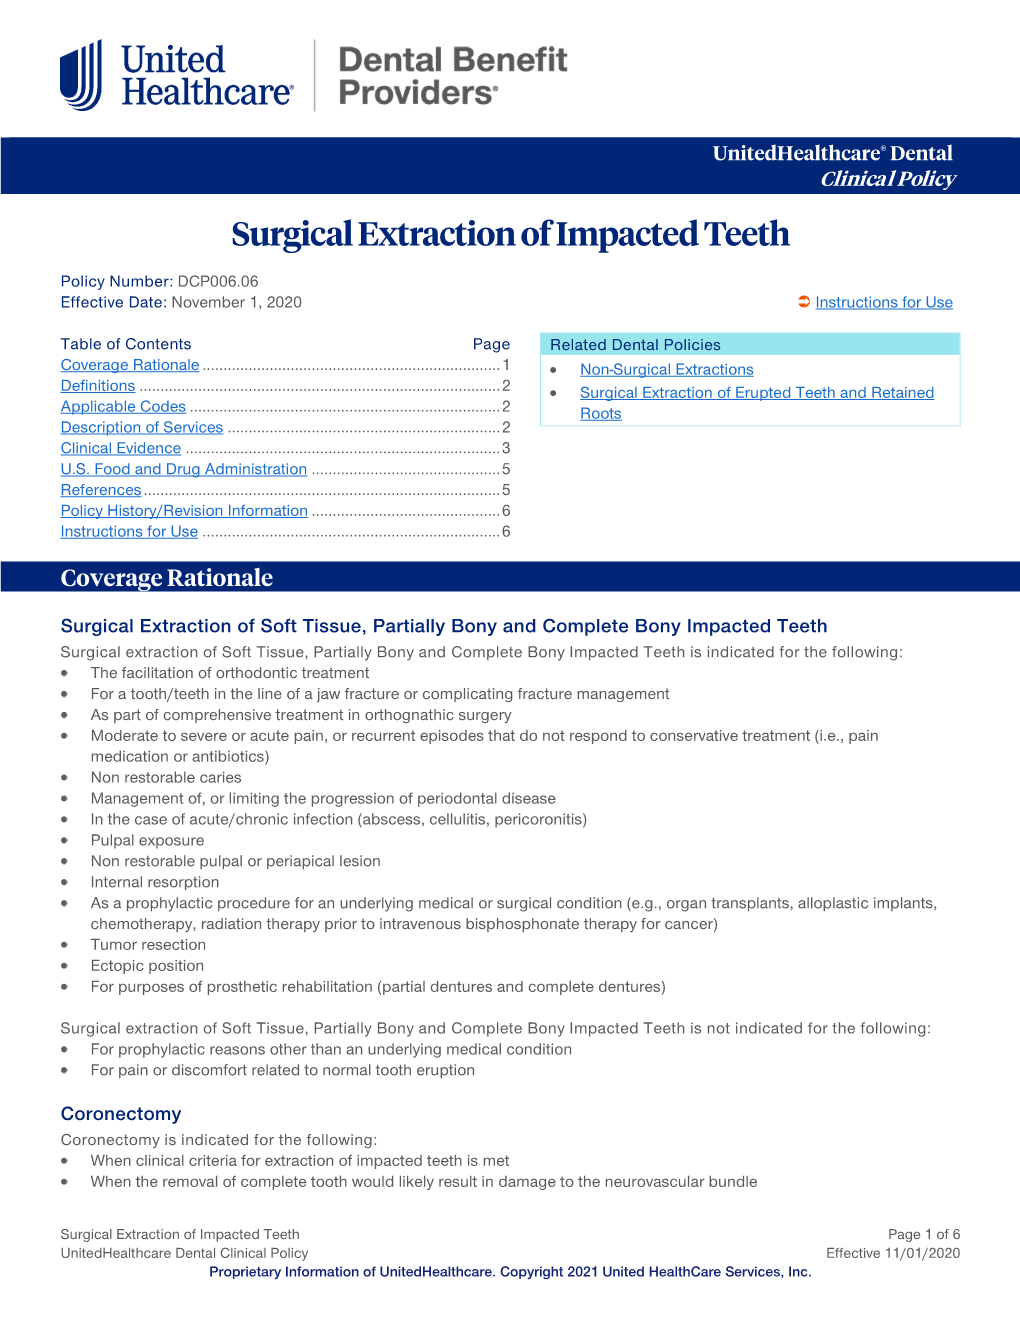 Surgical Extraction of Impacted Teeth – Dental Clinical Policy